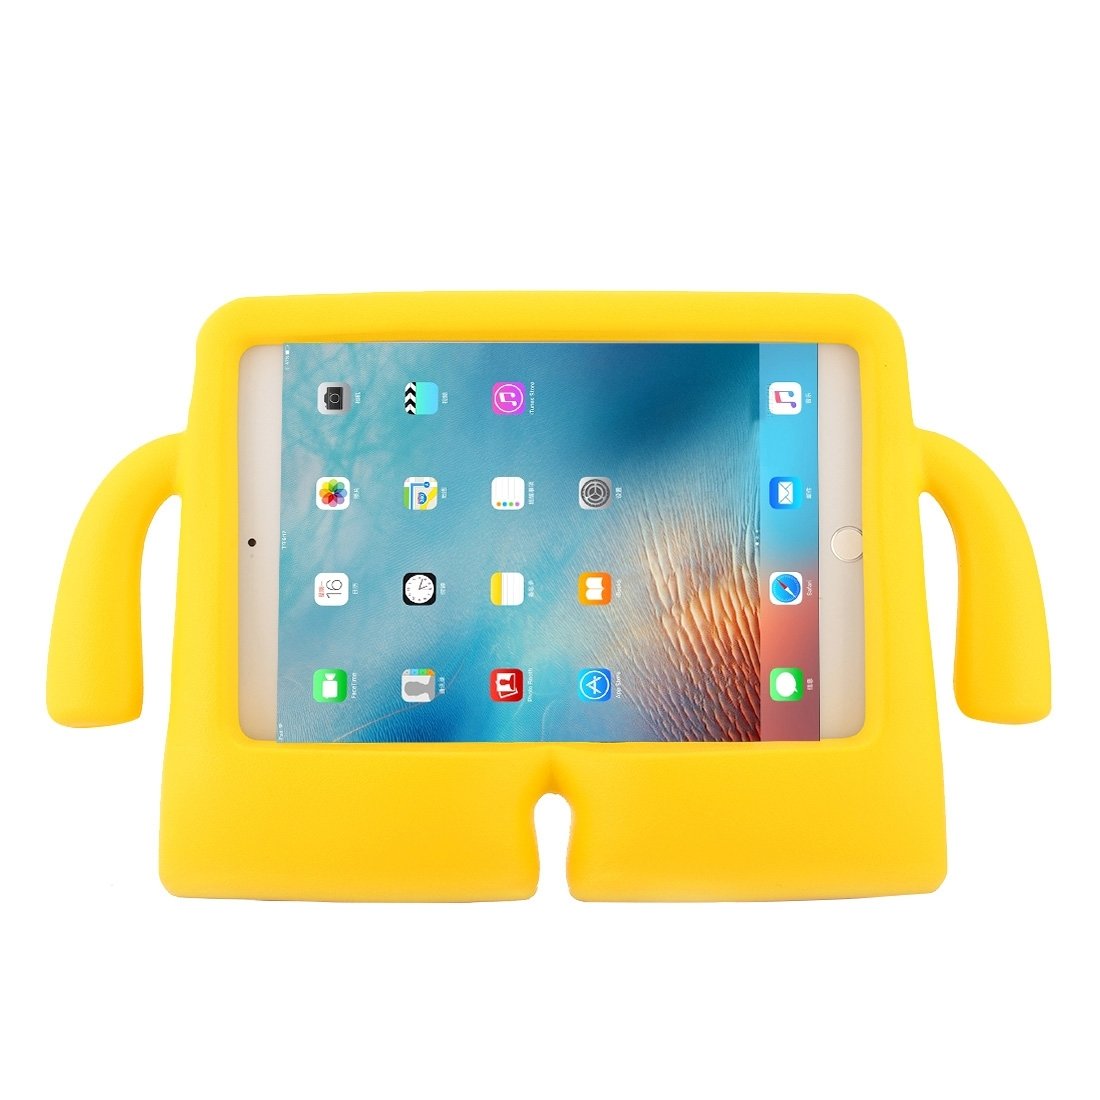 Shop4 - iPad Mini Hoes - Kids Cover voor Geel Shop4tablethoes